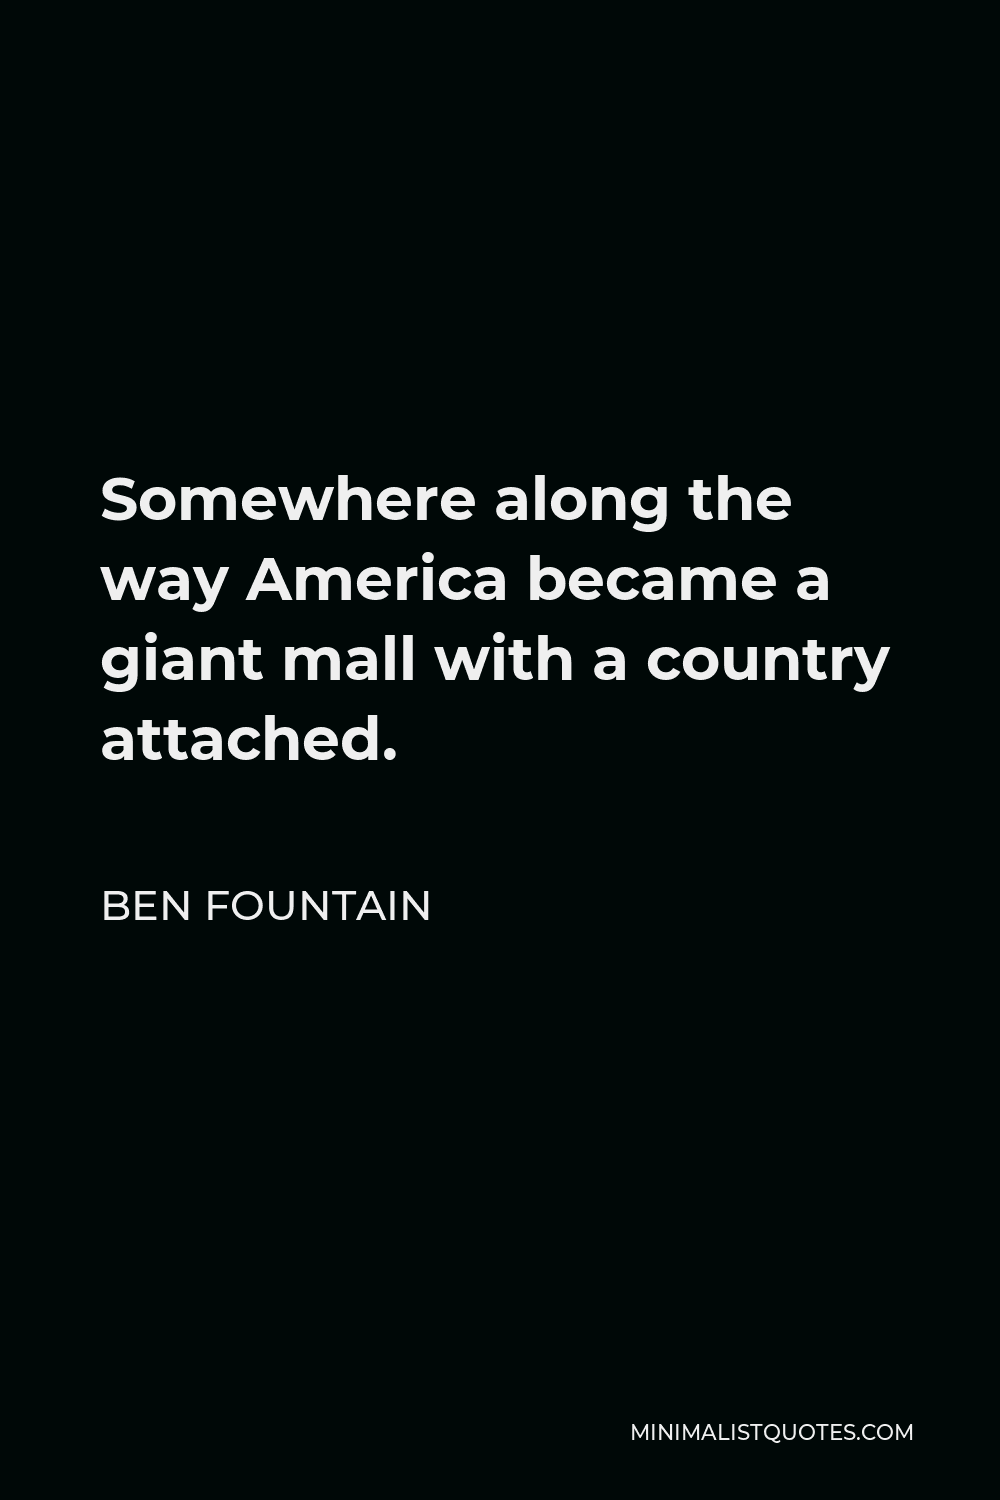 Ben Fountain Quote - Somewhere along the way America became a giant mall with a country attached.